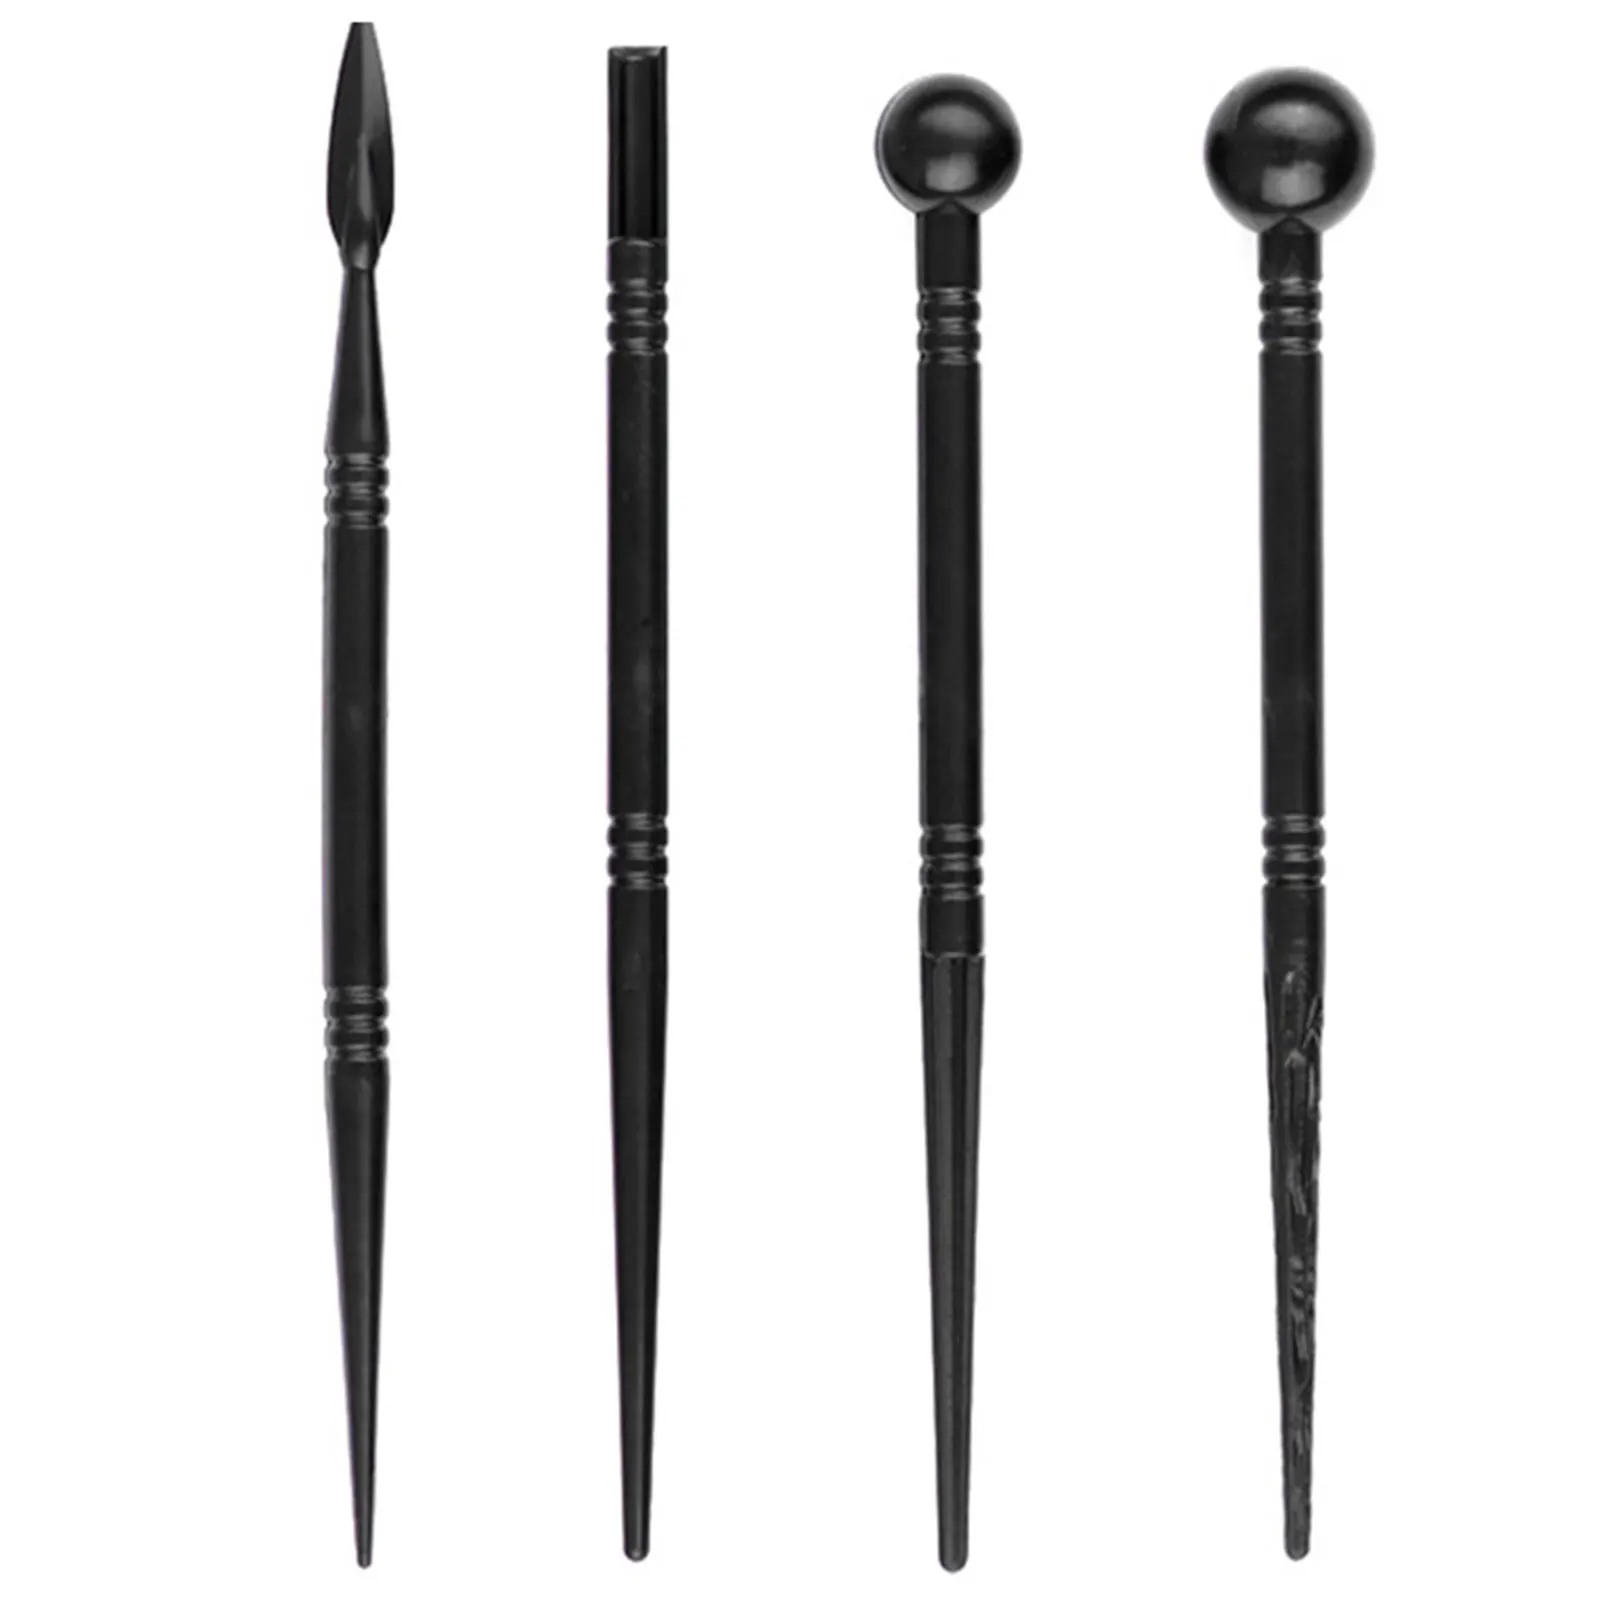 

Sculpting Tool Carving Pen Kit 4Pcs Clay Jewelry-Making Supplies Shaping Carving Pen Brush Modeling Dotting Tool Pottery Craft